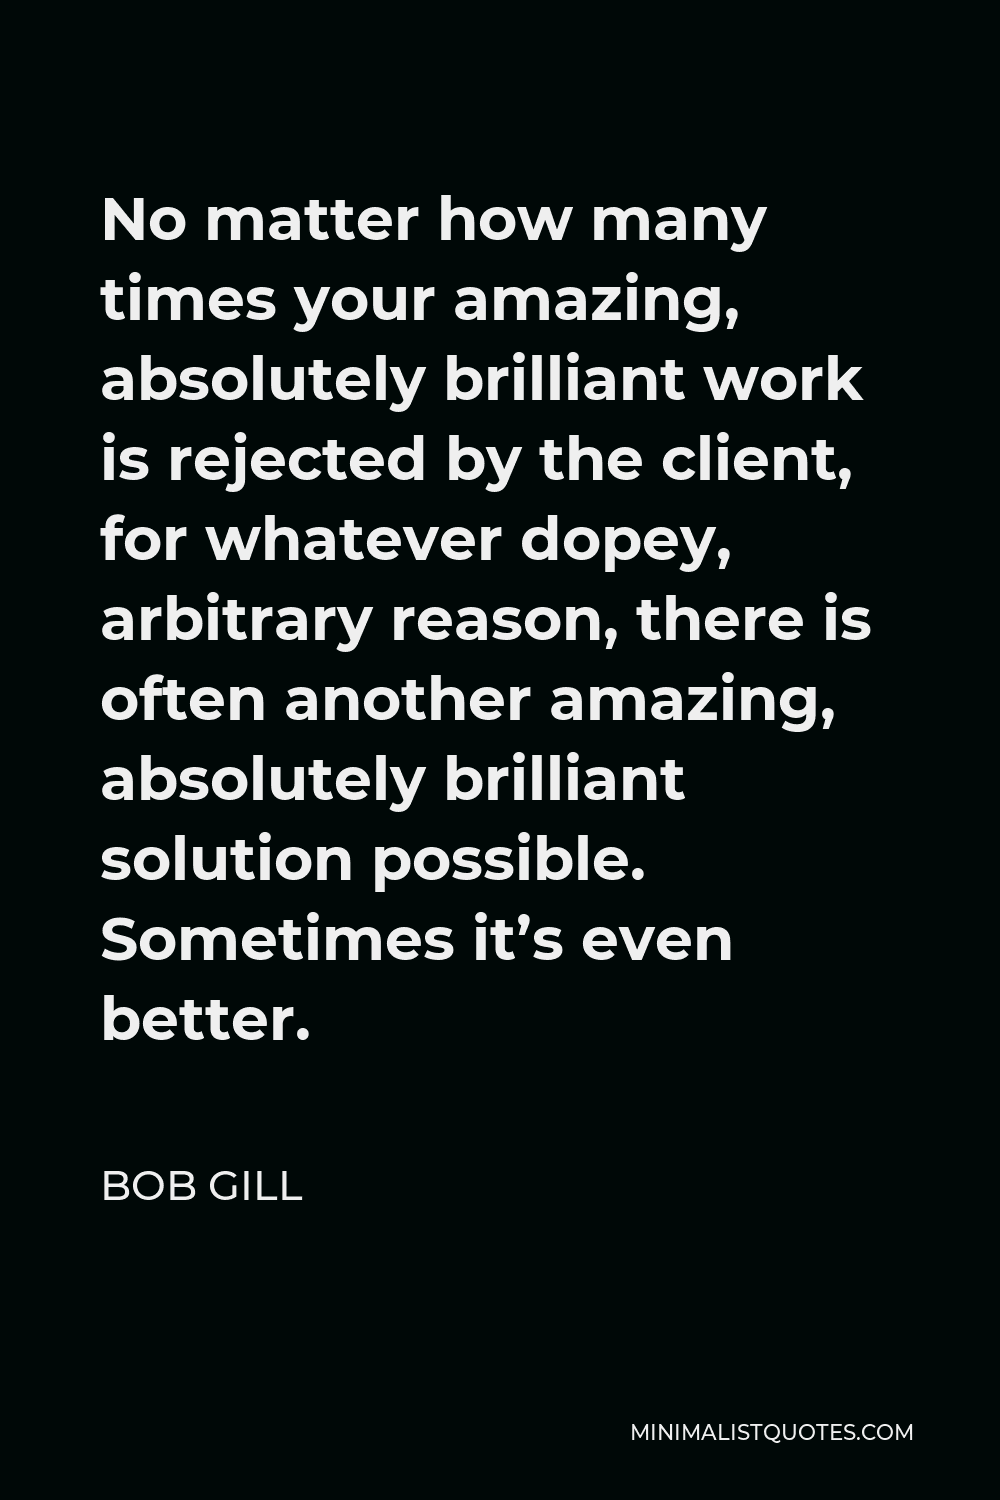 Bob Gill Quote - No matter how many times your amazing, absolutely brilliant work is rejected by the client, for whatever dopey, arbitrary reason, there is often another amazing, absolutely brilliant solution possible. Sometimes it’s even better.